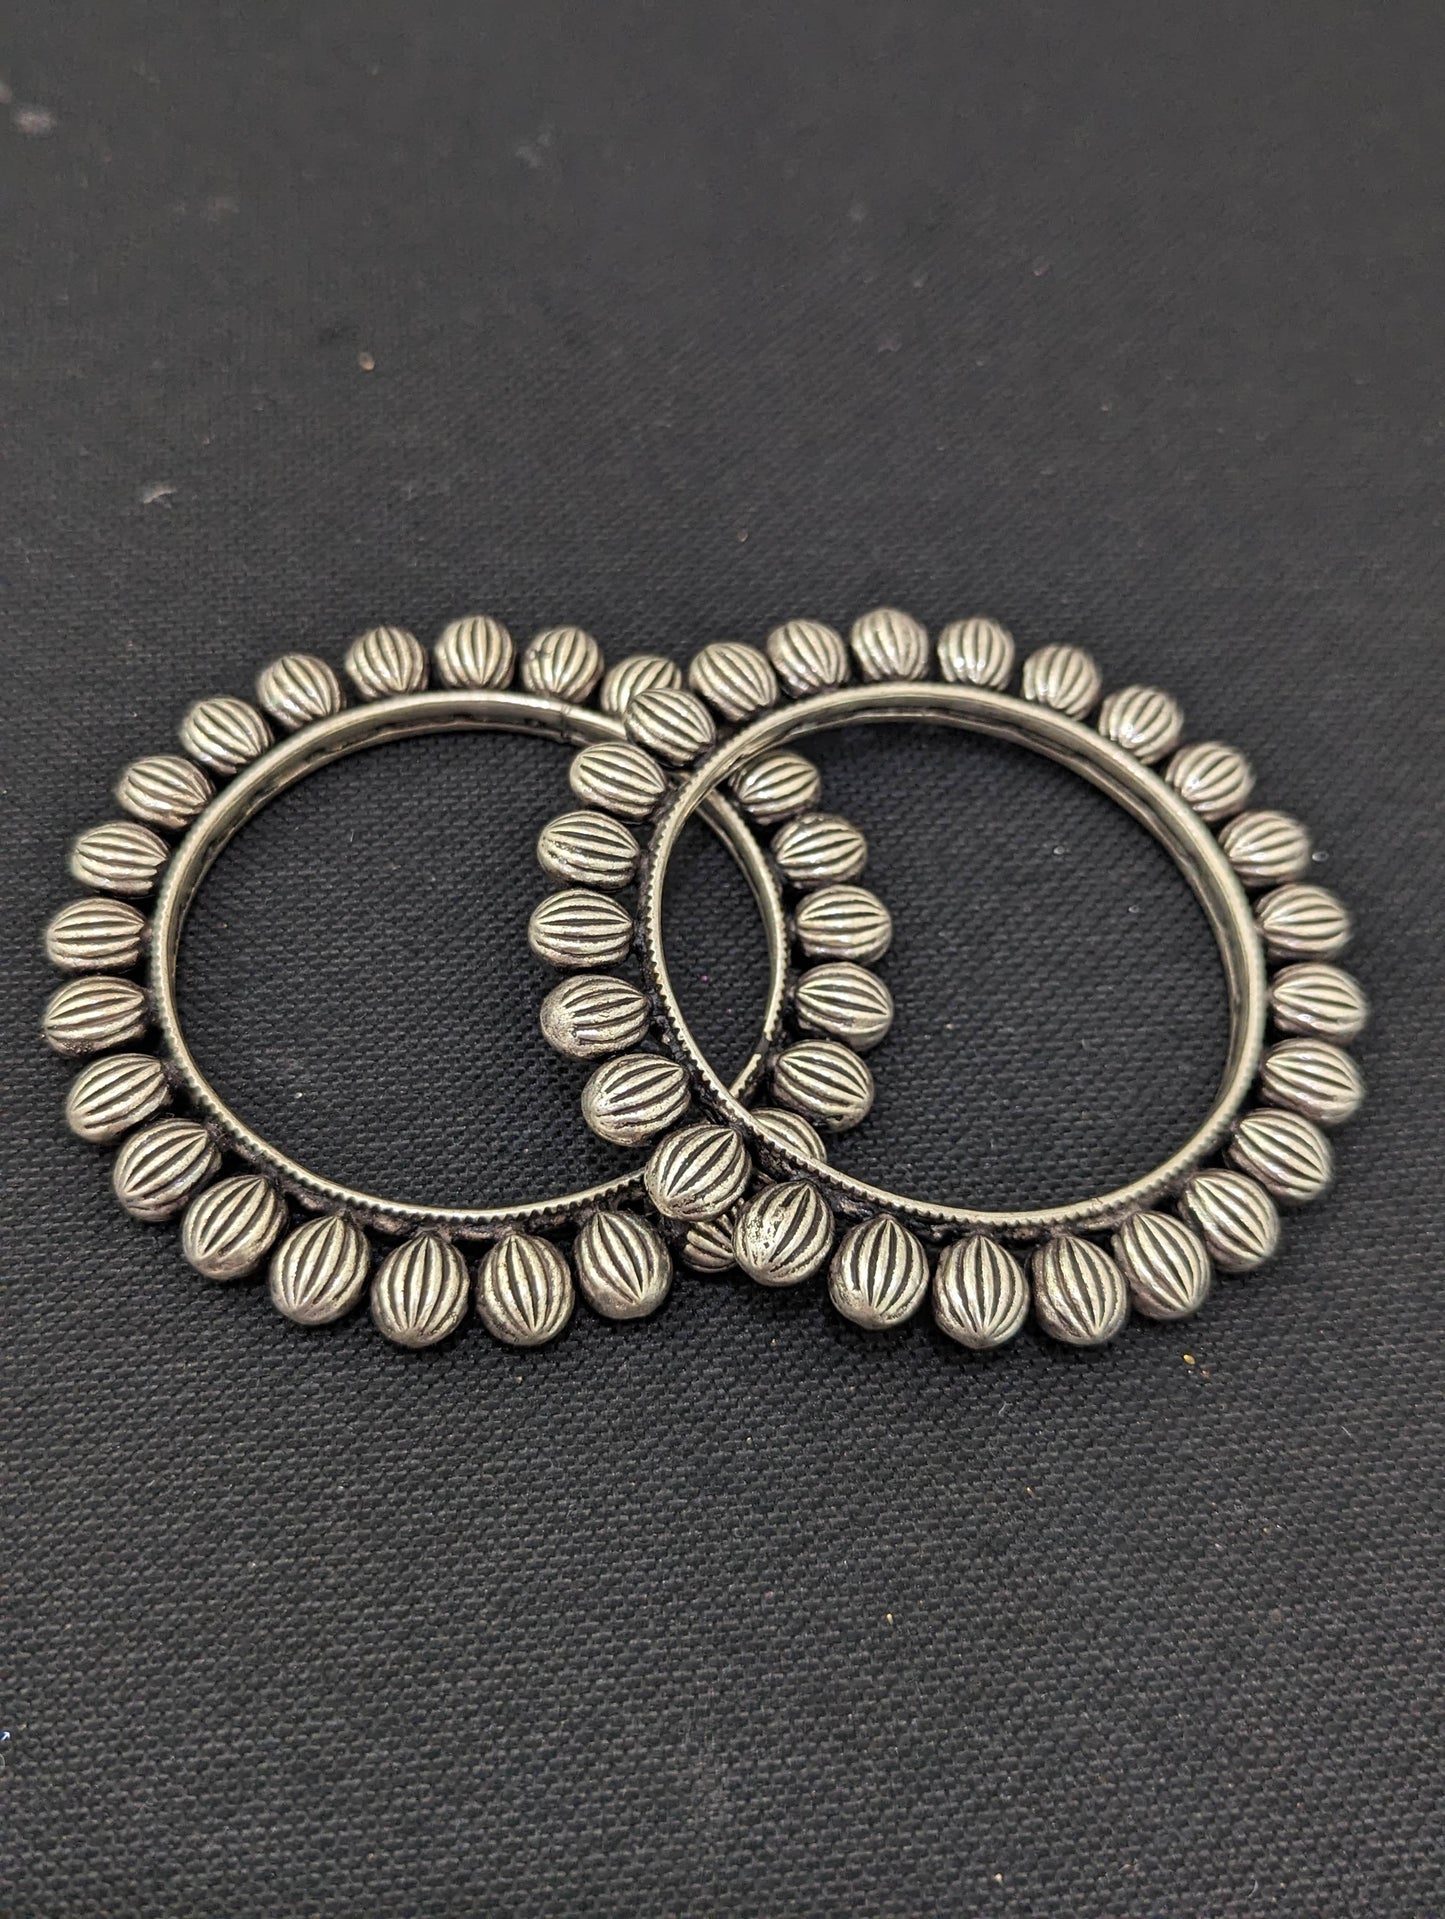 Oxidized silver pair bangles - Lined Oval design